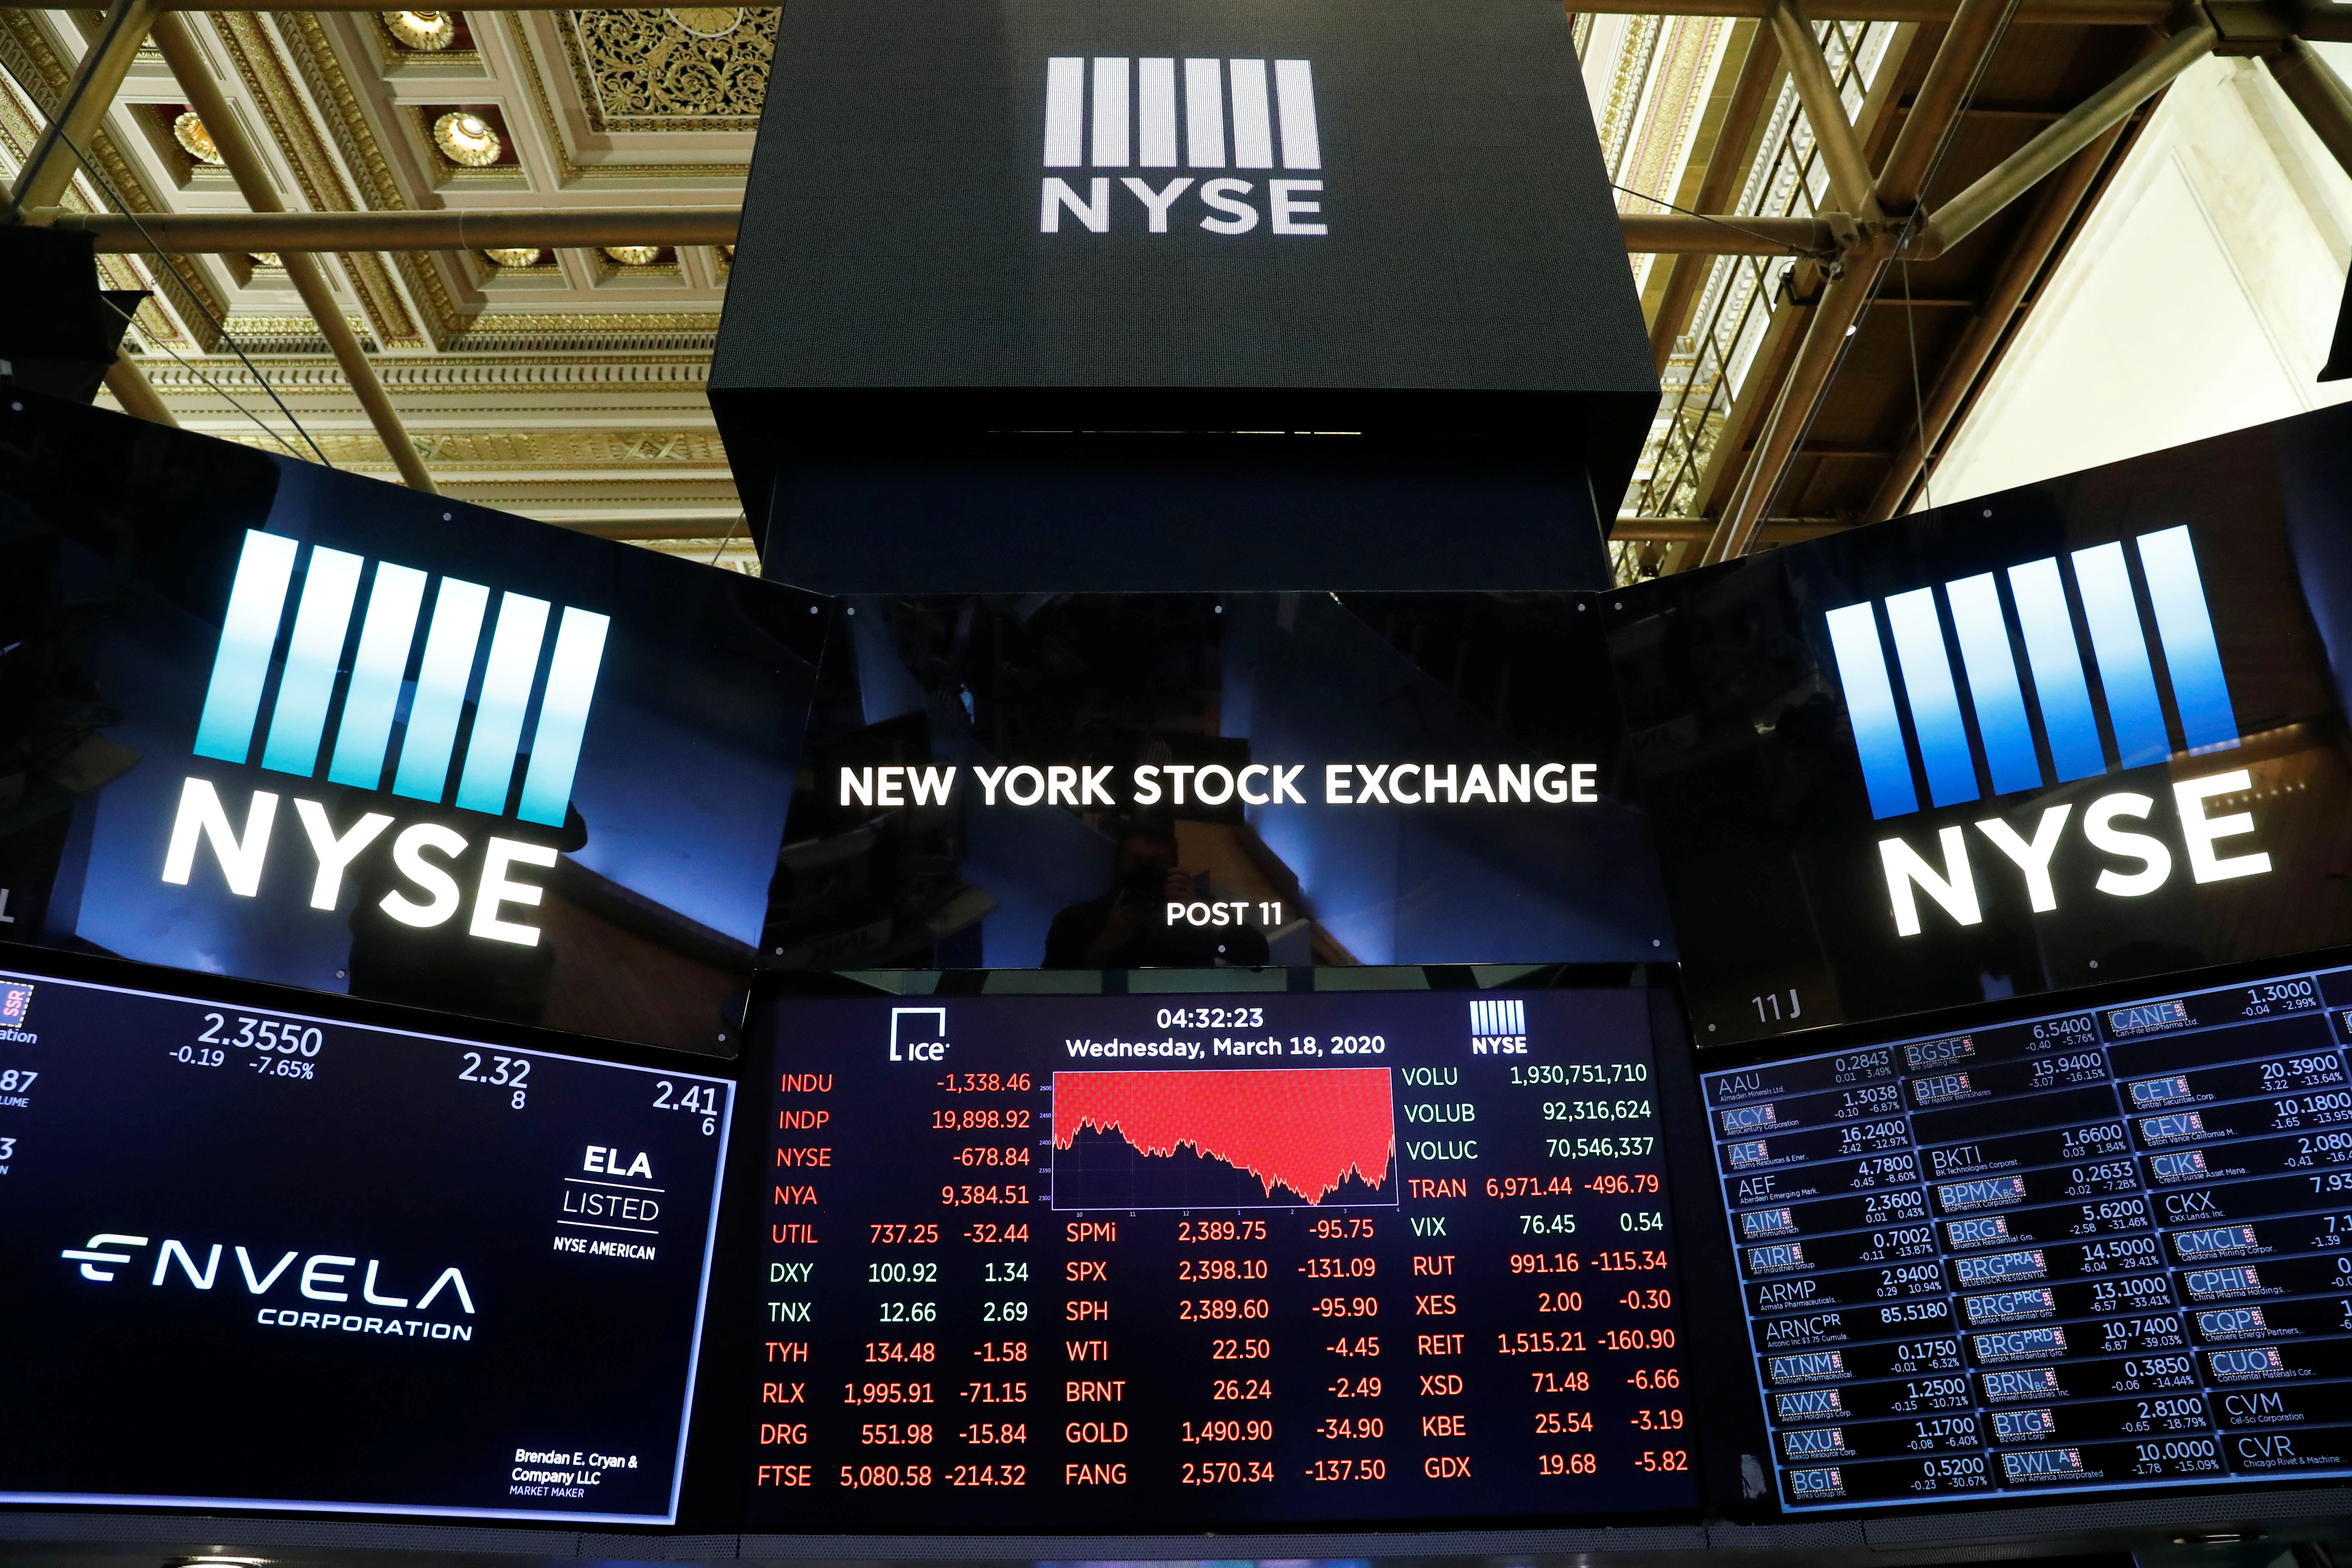 Screens display trading information over the floor of the New York Stock Exchange (NYSE) in New York, U.S., March 18, 2020. REUTERS/Lucas Jackson